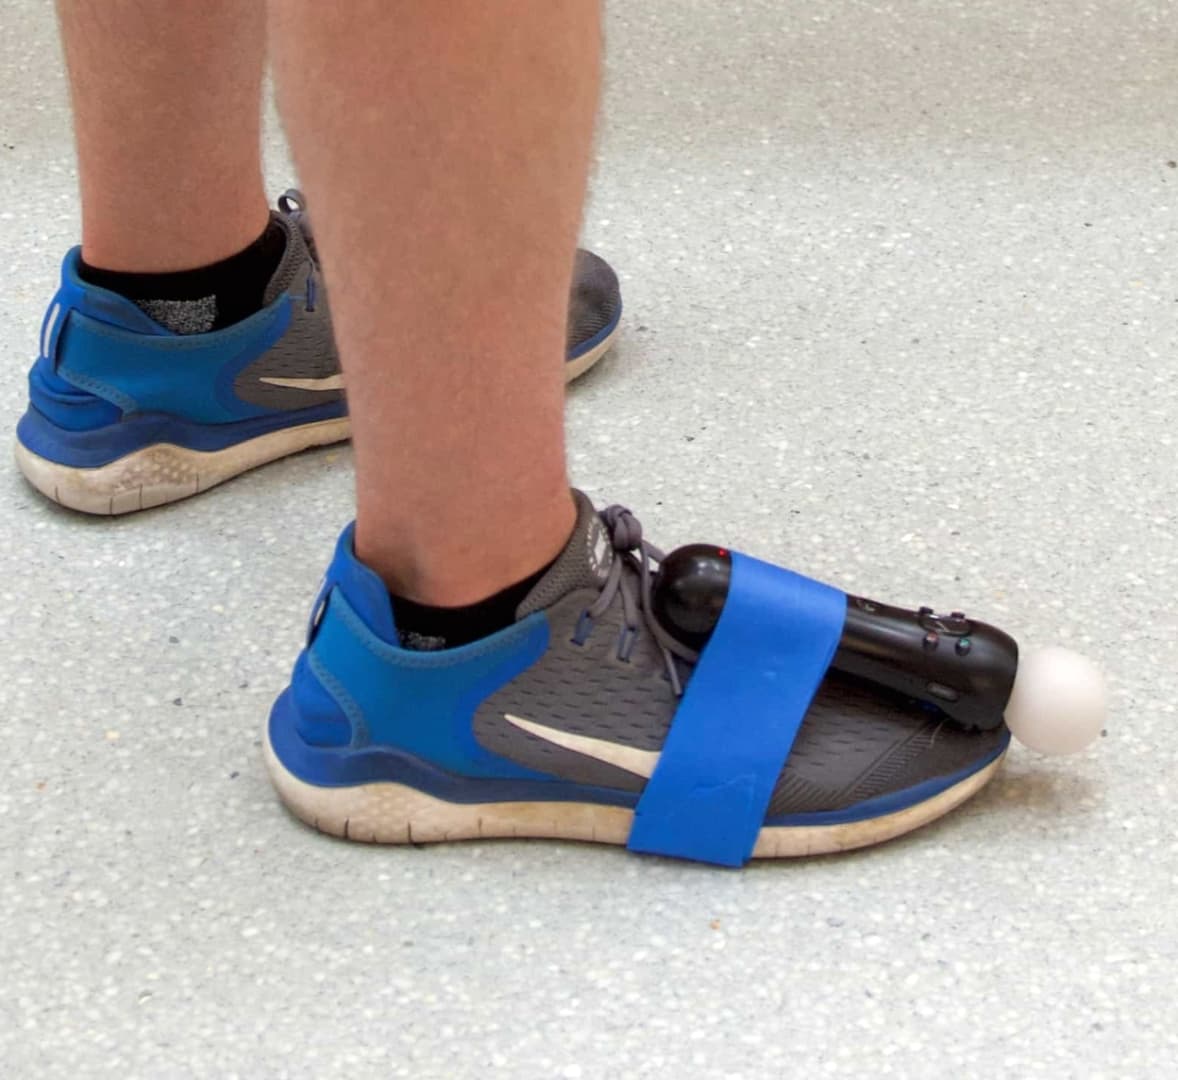 A foot wearing a shoe with a PlayStation Move motion controller taped to it. The foot is flat on the floor.